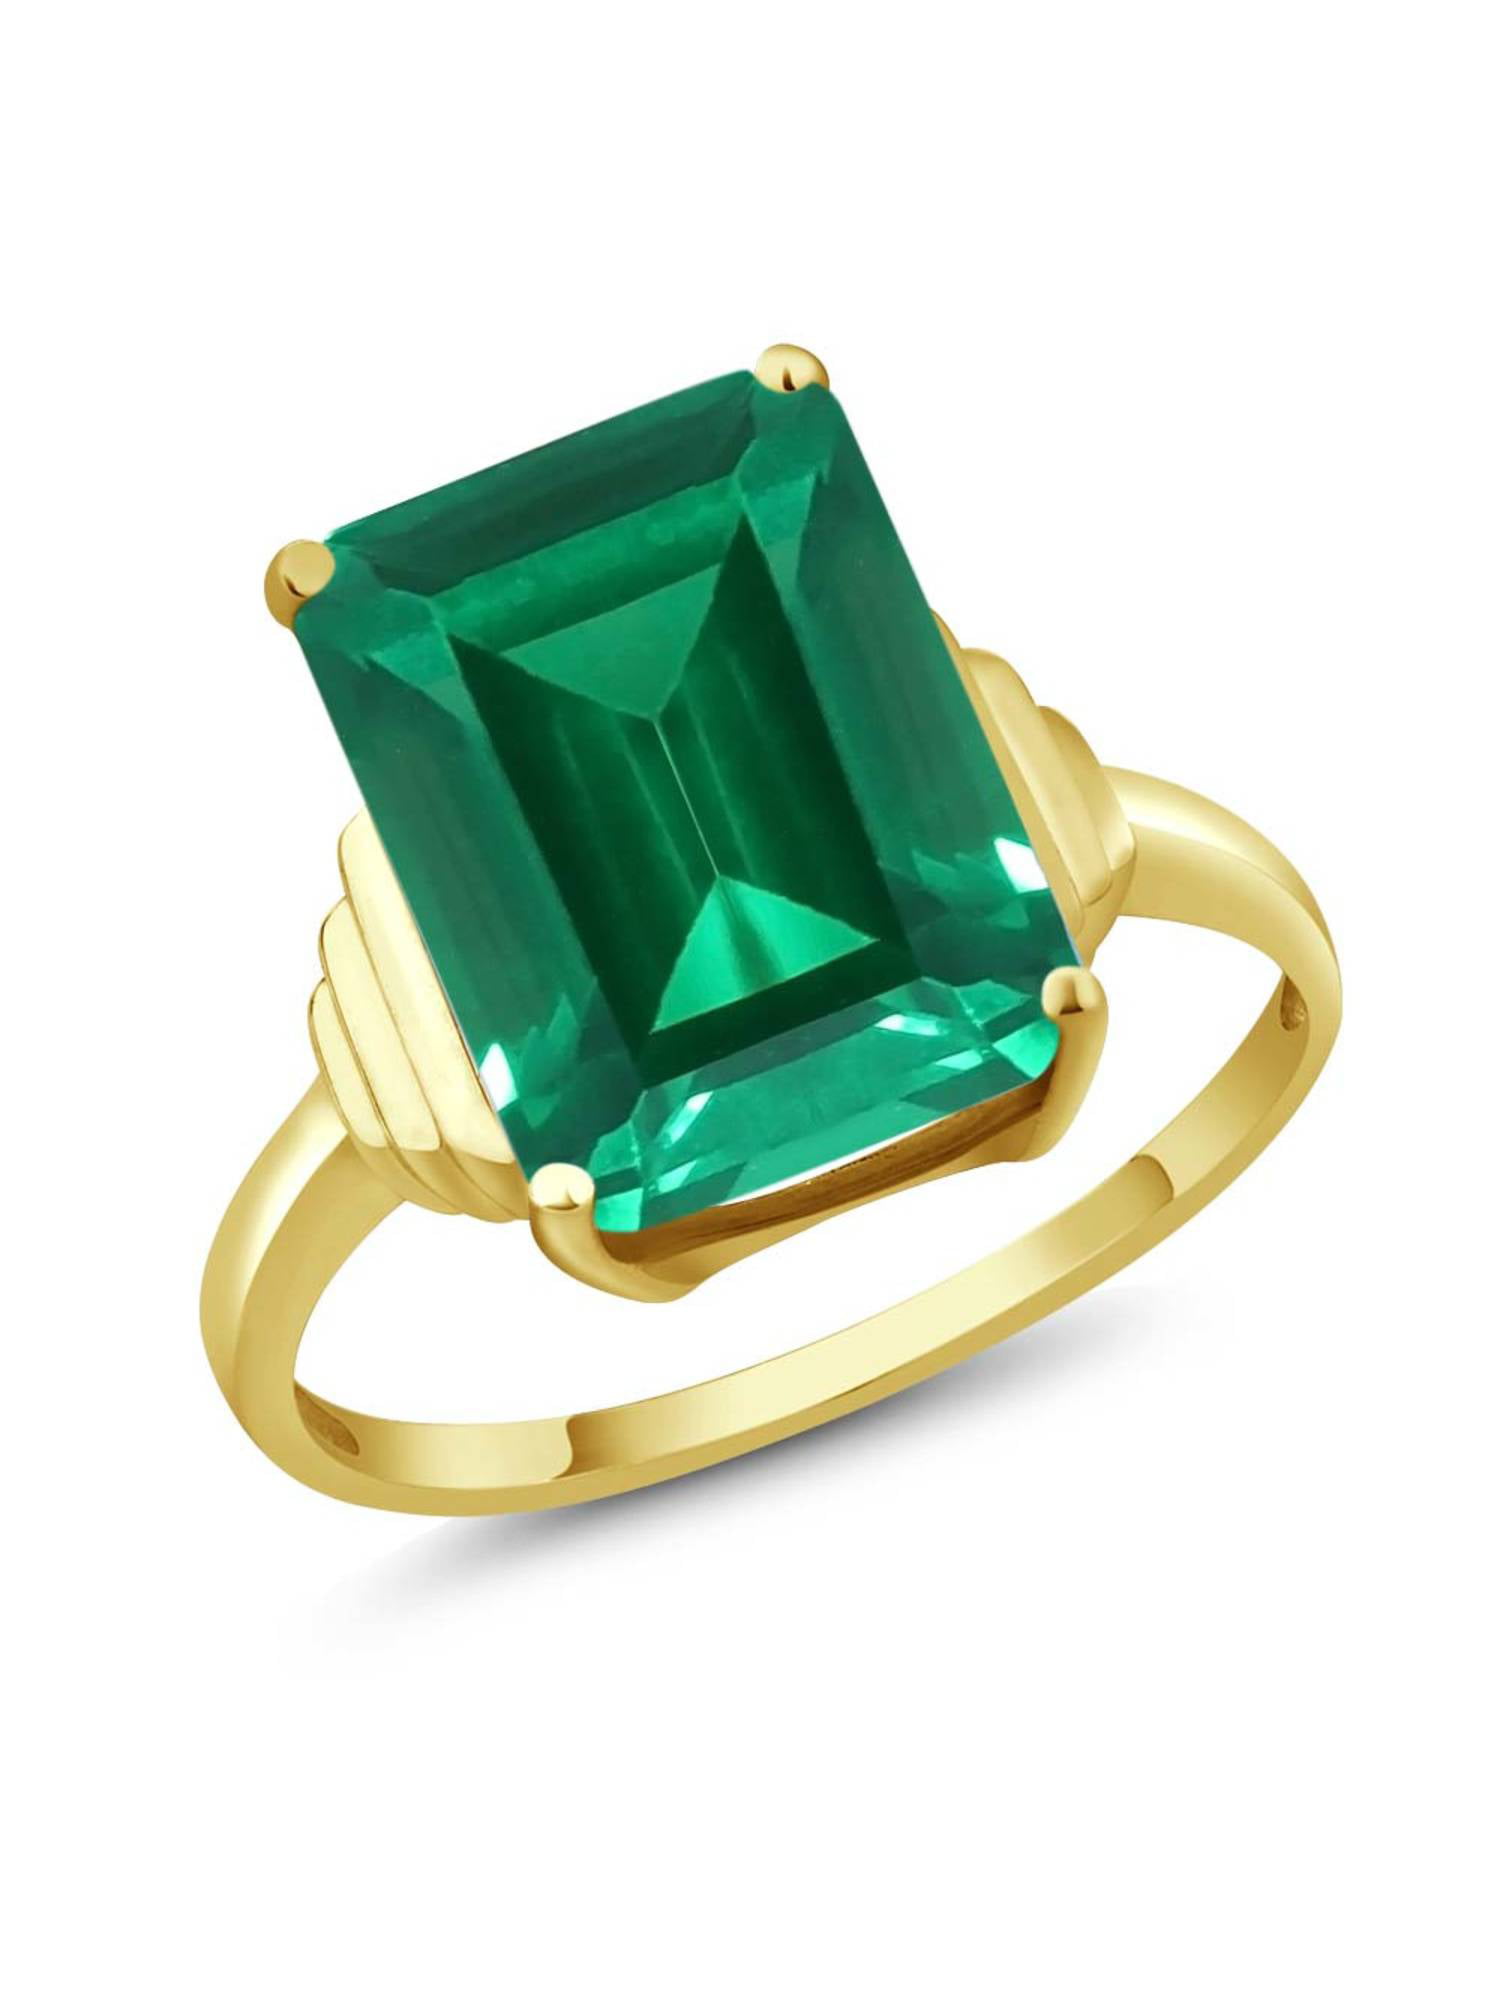 Gem Stone King 6.50 Ct Green Simulated Emerald 18K Yellow Gold Plated Silver Womens Solitaire Ring Available in size 5, 6, 7, 8, 9